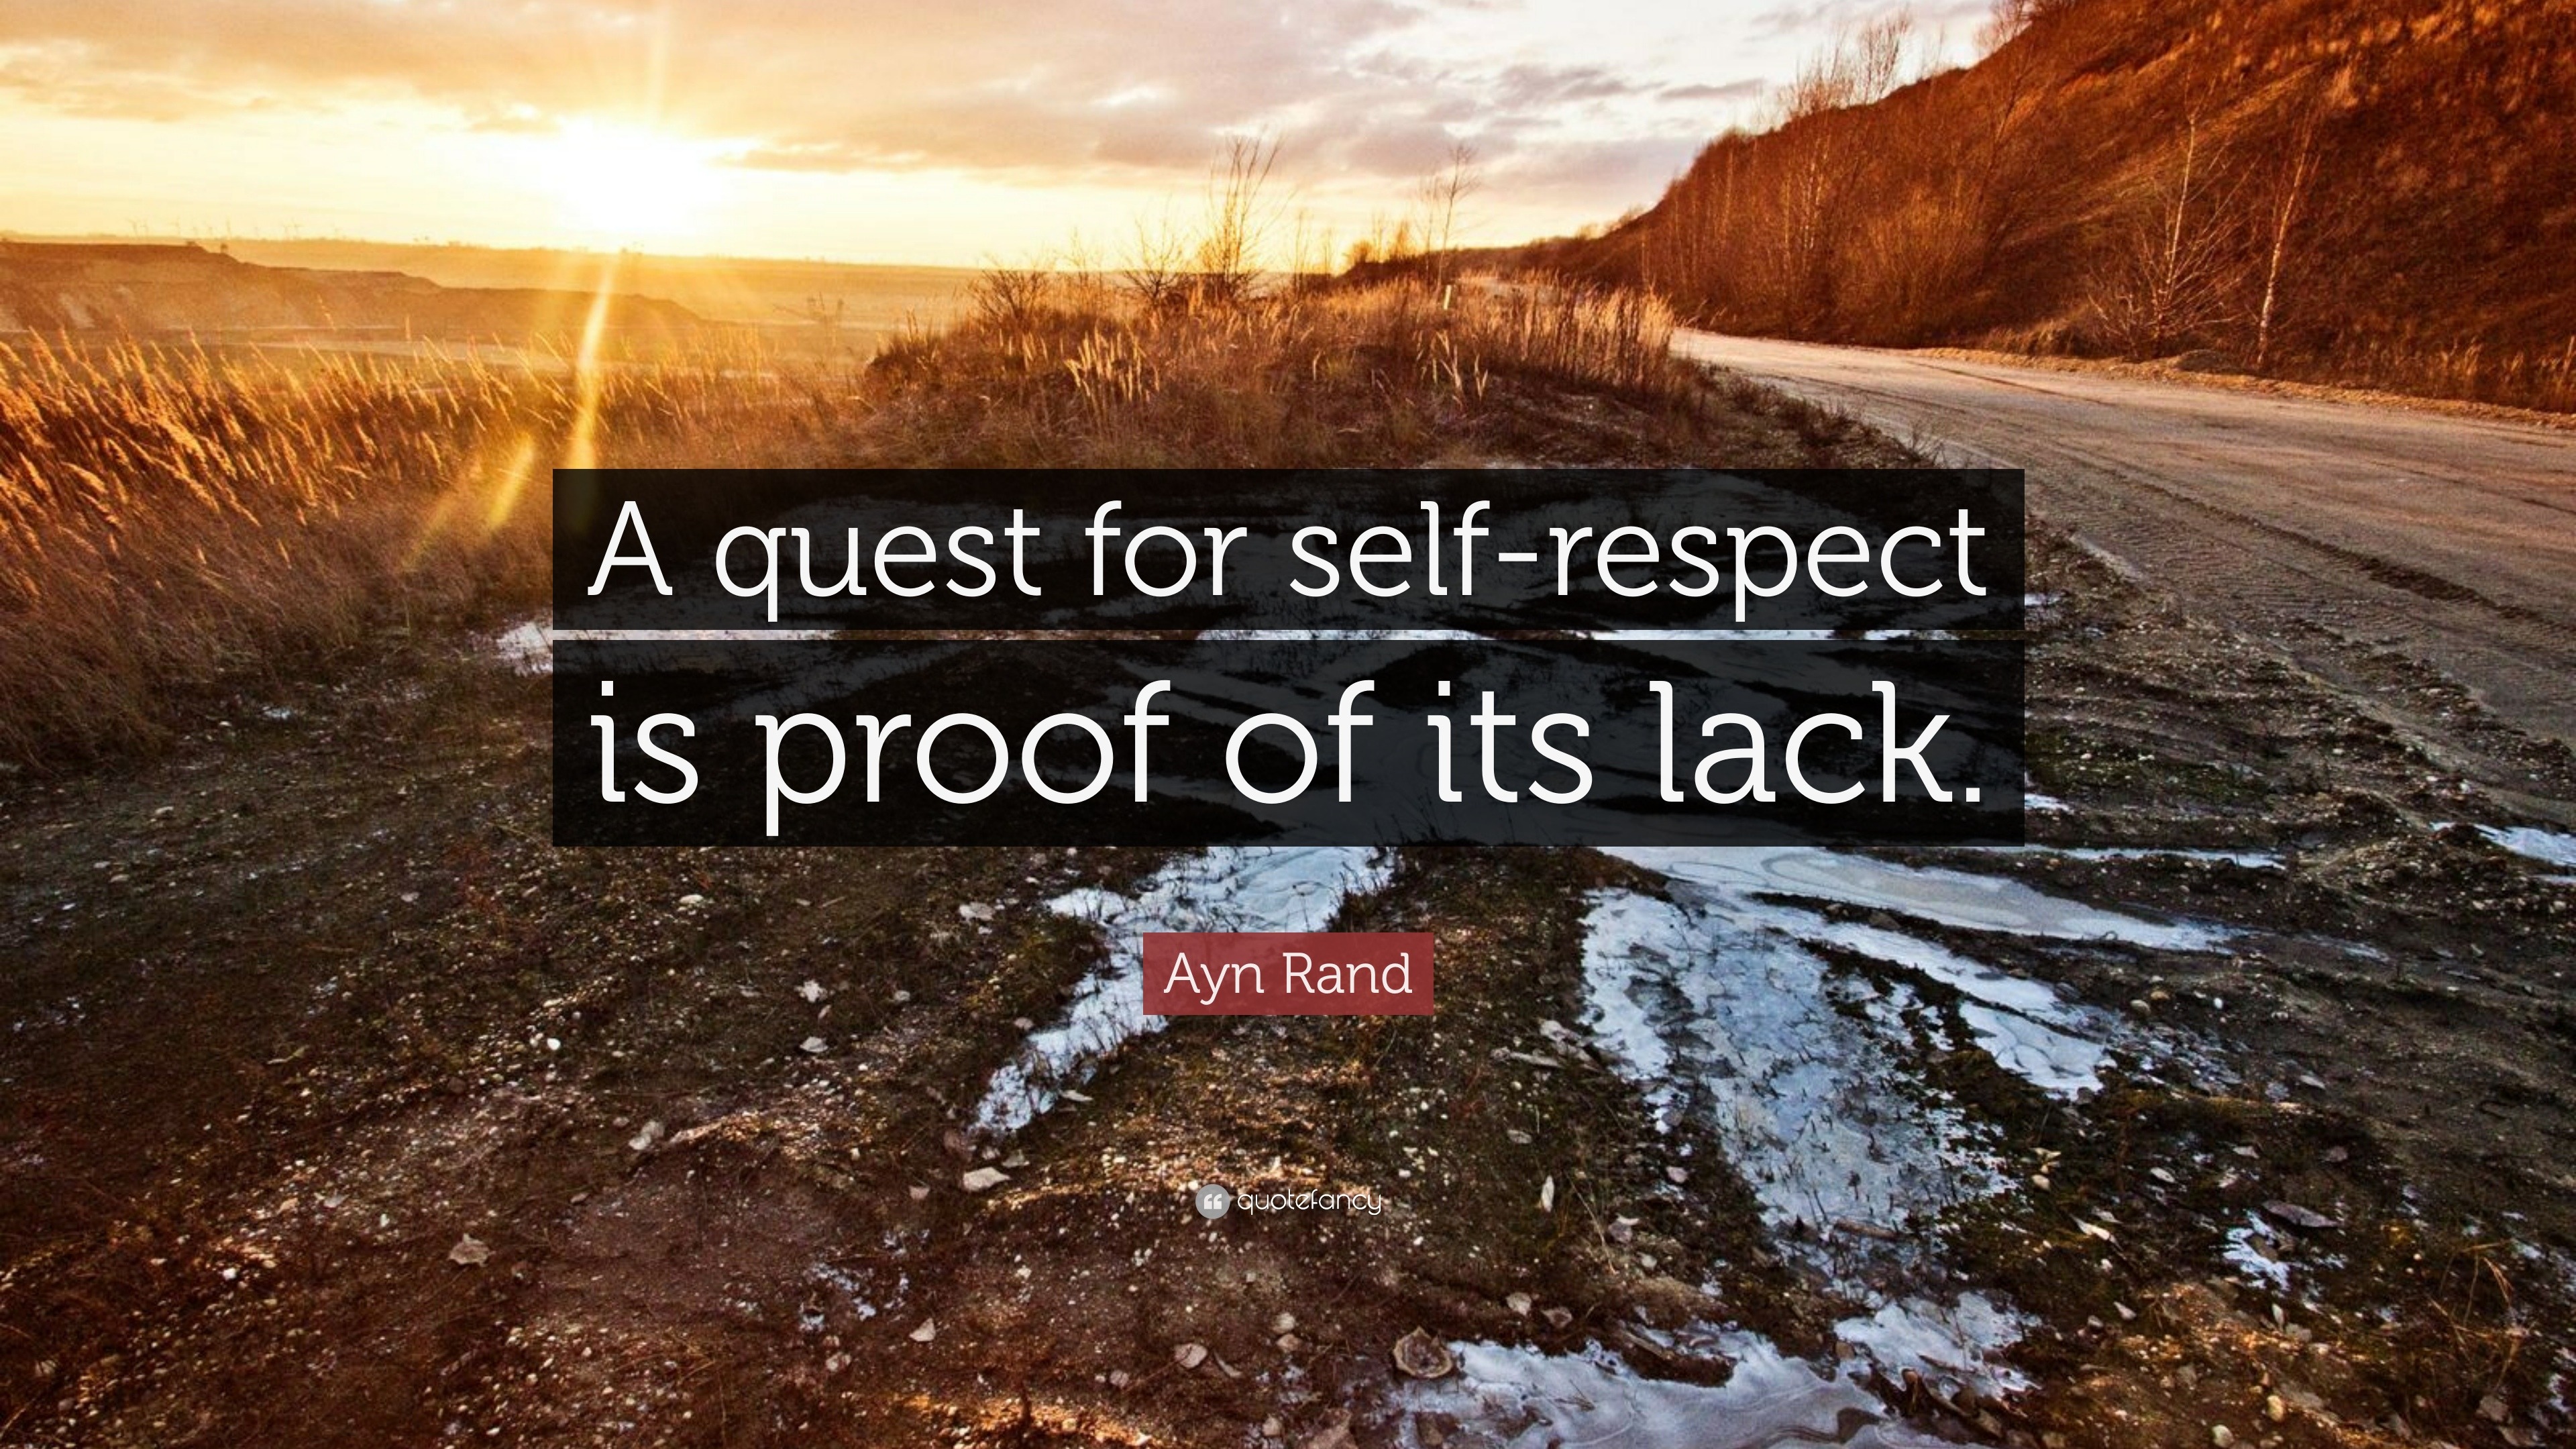 self respect quotes